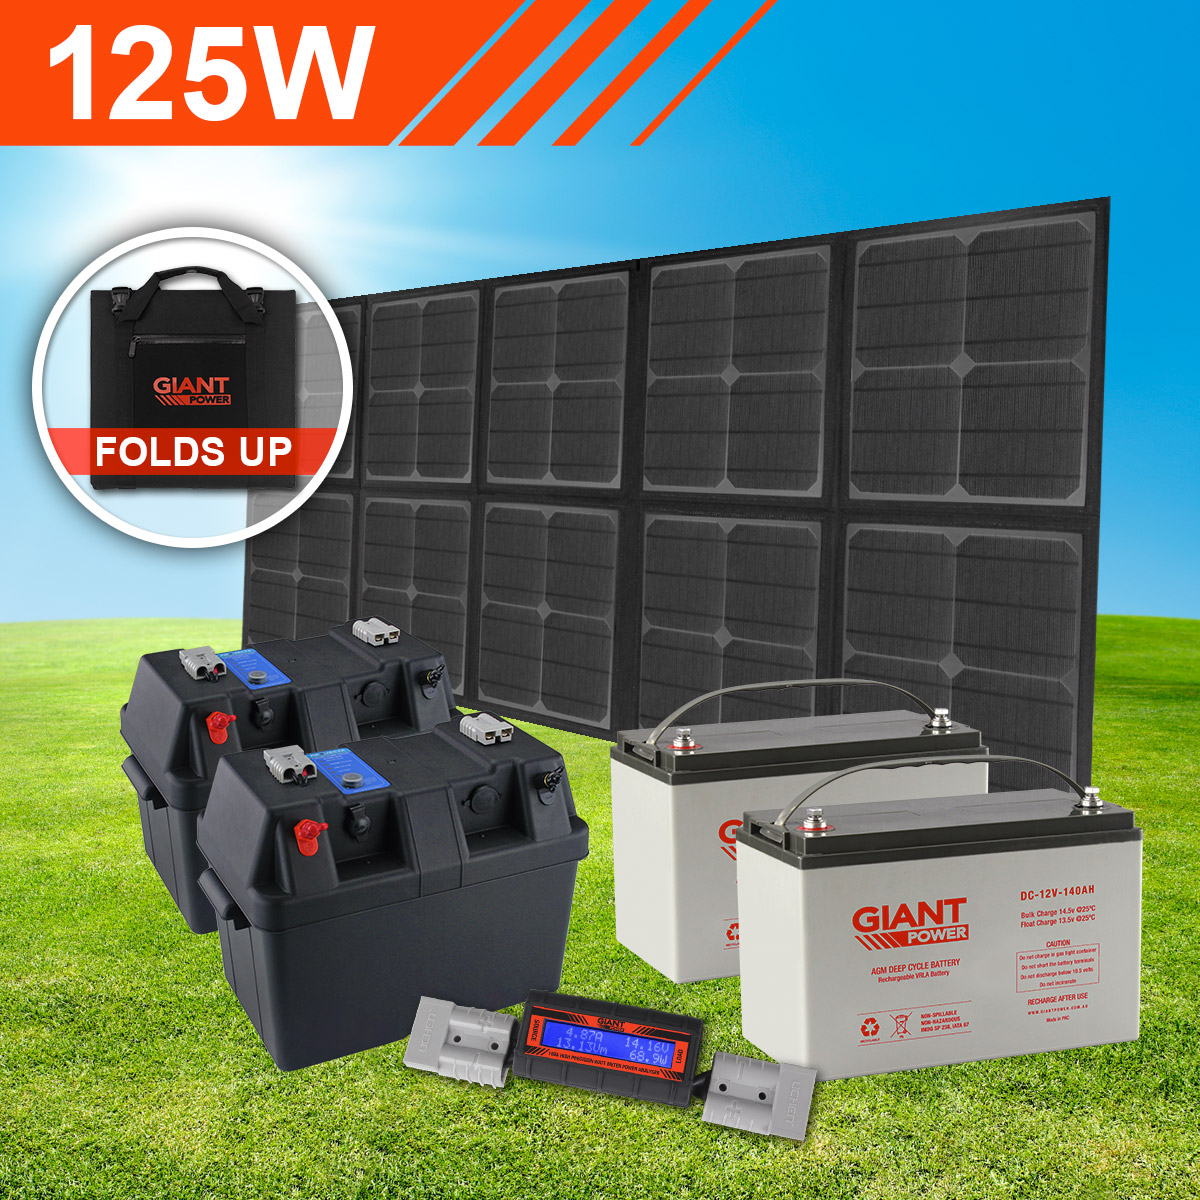 Solar For Camping The Best Solar Camping Setup Guide To Camping With Solar Power Au Solar Setups